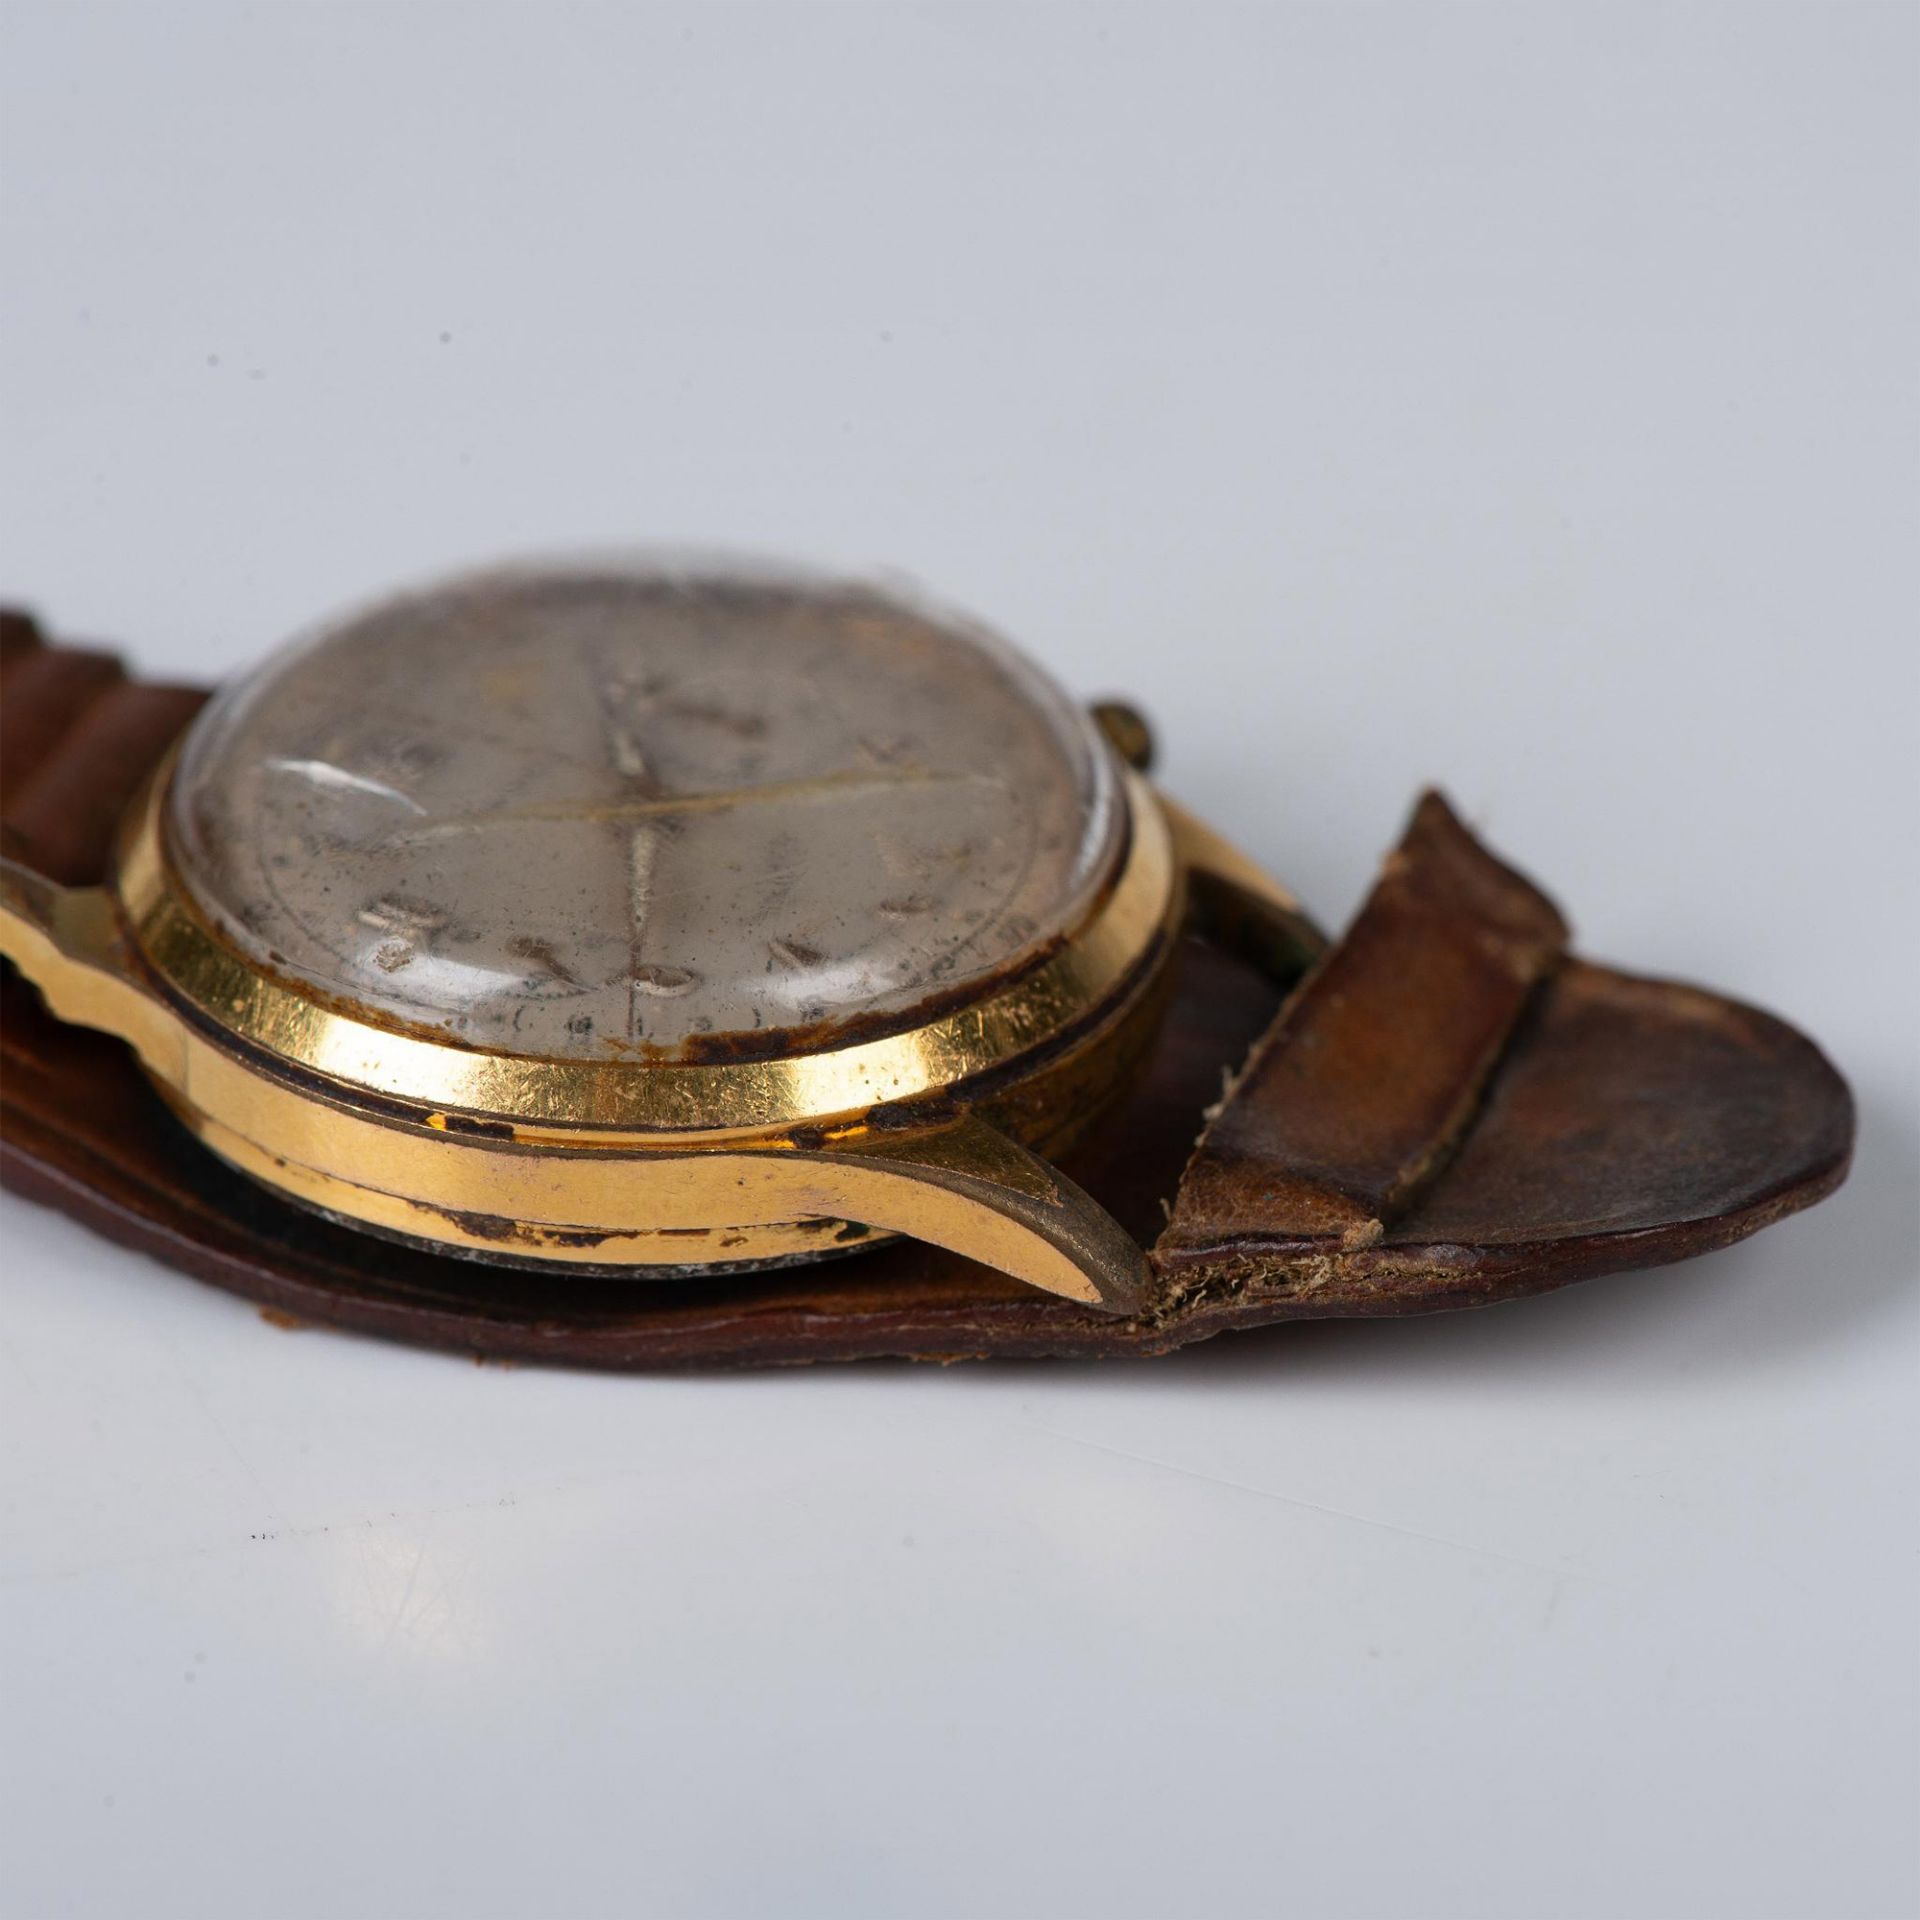 Gents 1950s/60s Favor Chronograph Wrist Watch - Image 3 of 7